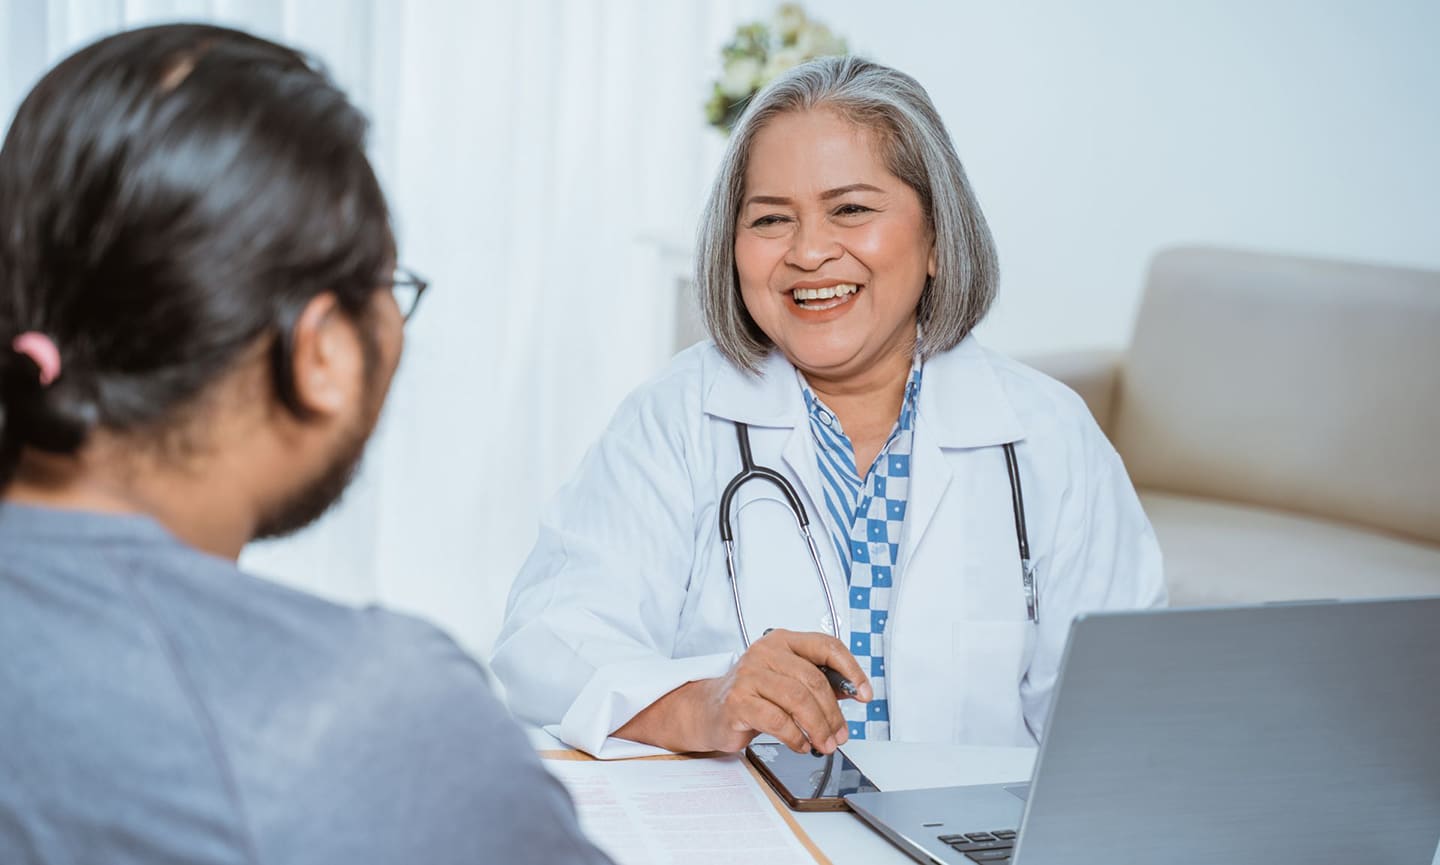 A primary care physician speaks with a patient about their care plan.